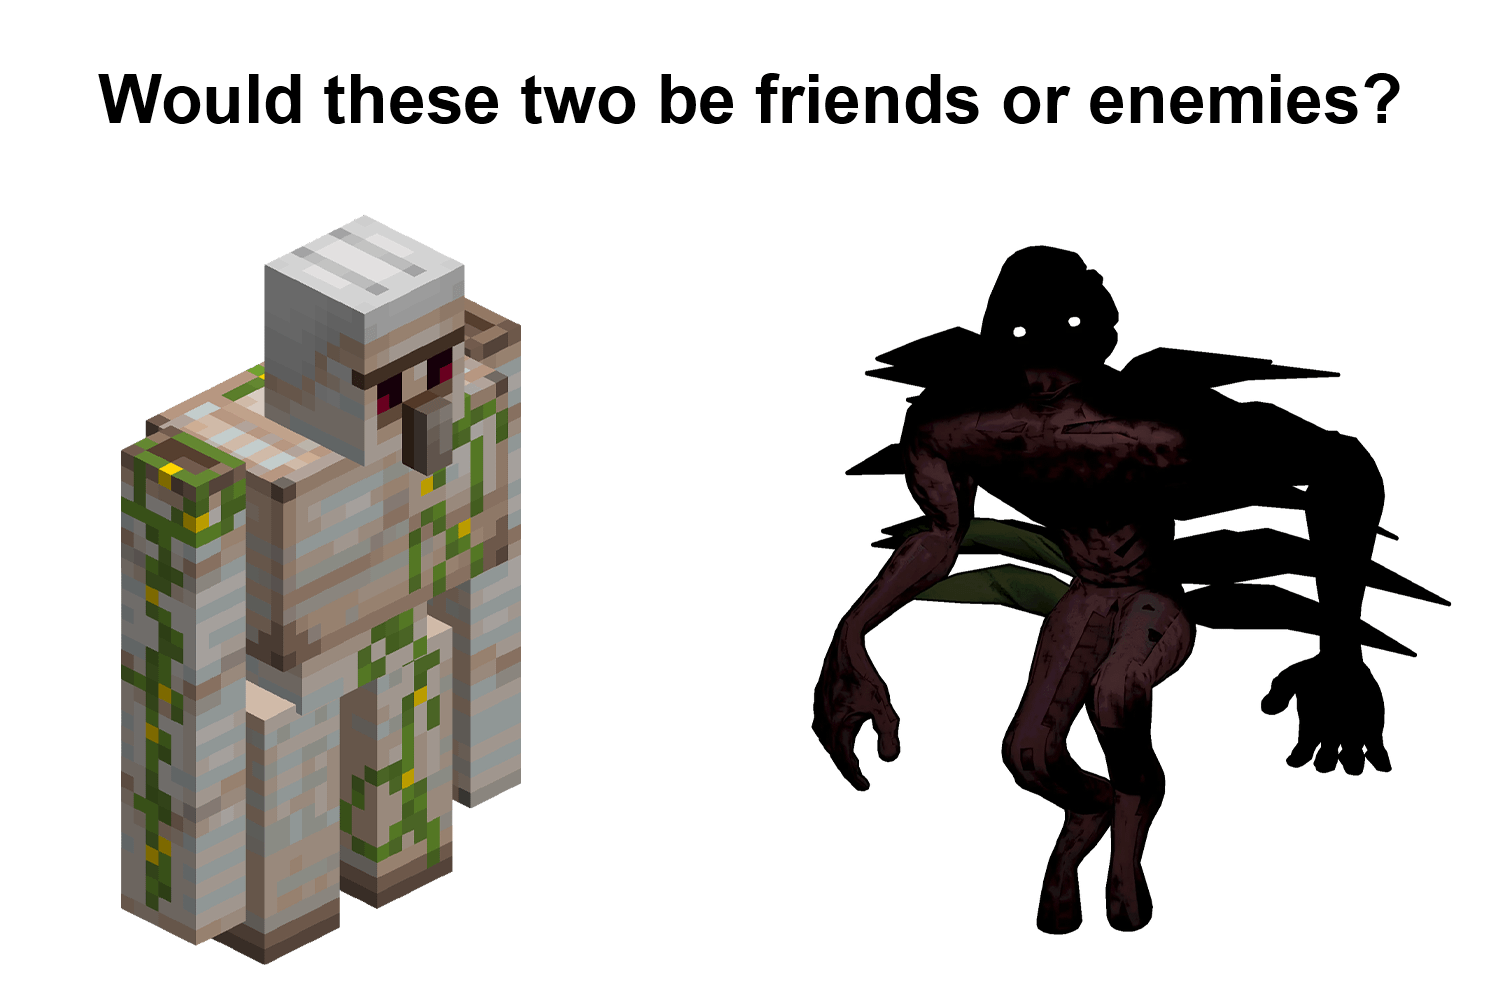 Minecraft Memes - Would these two be friends or foes?